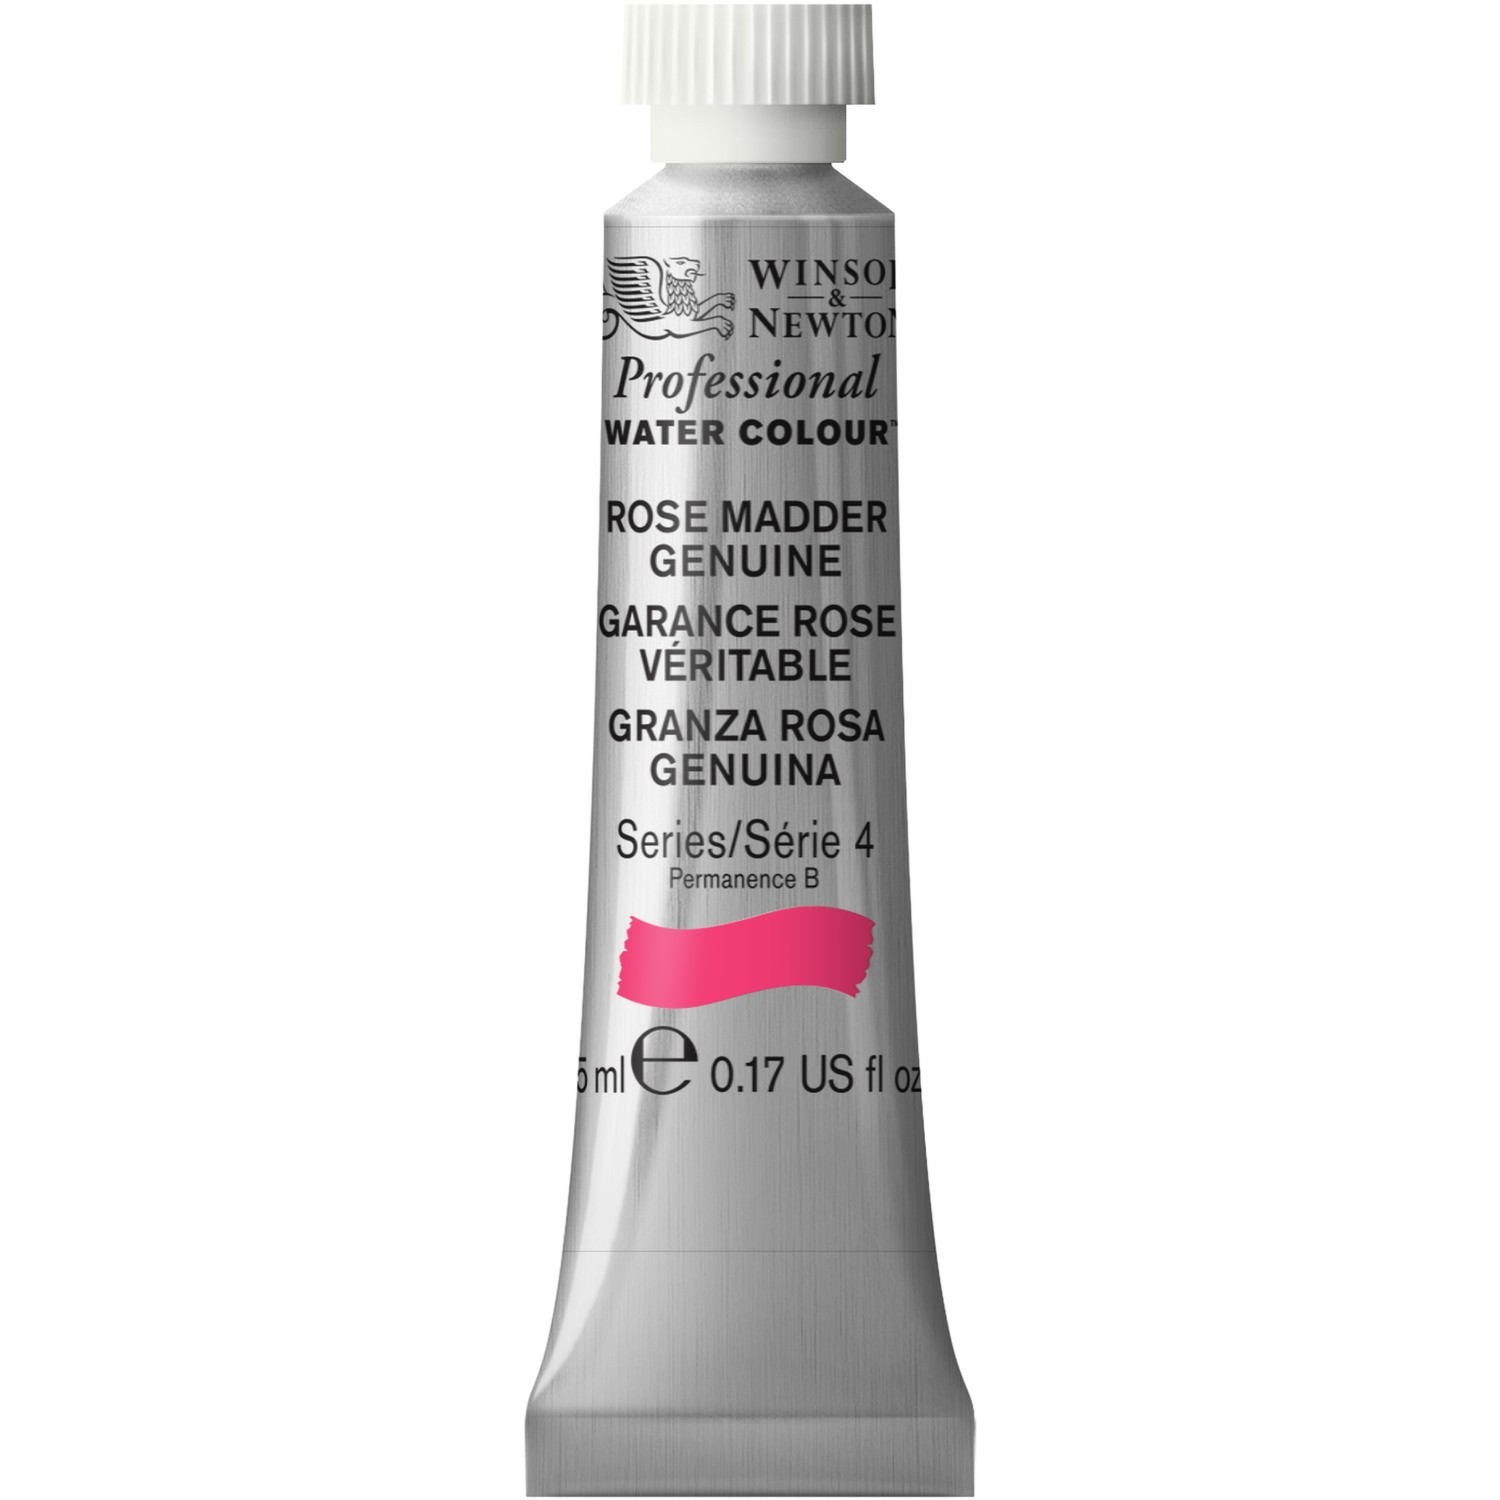 Winsor and Newton 5ml Professional Watercolour Paint - Rose Madder Image 1